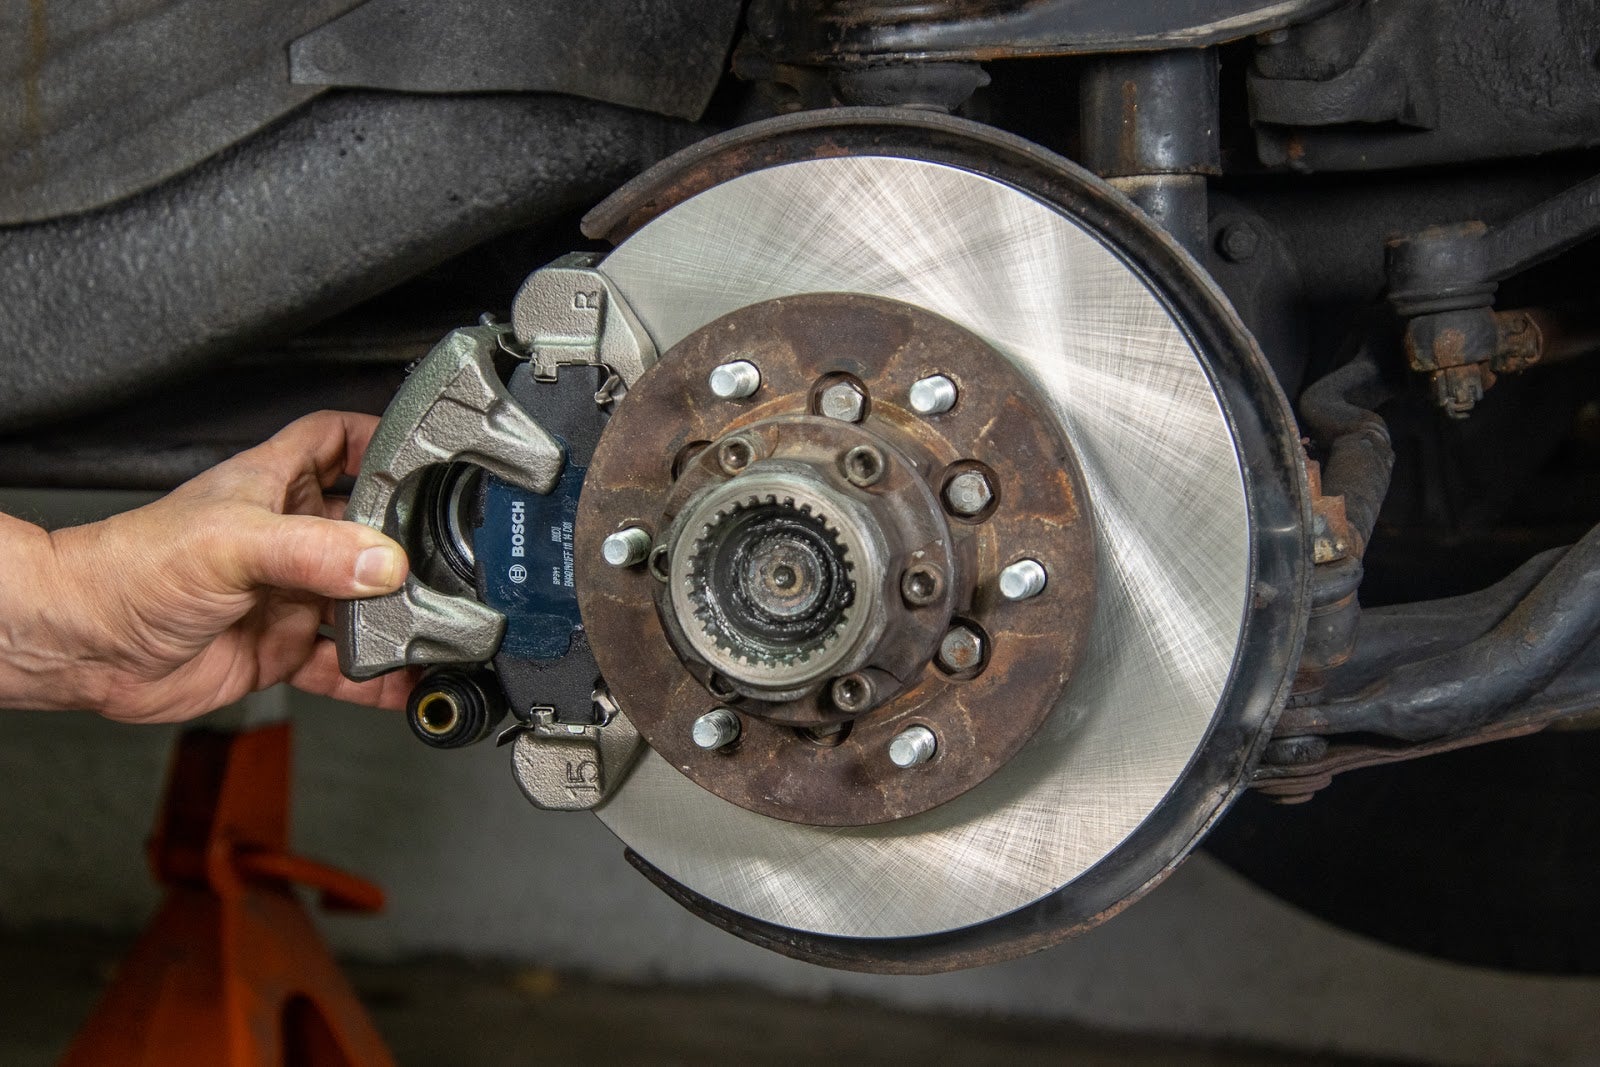 Hands-On Review: Best Brake Pads for Performance and Safety